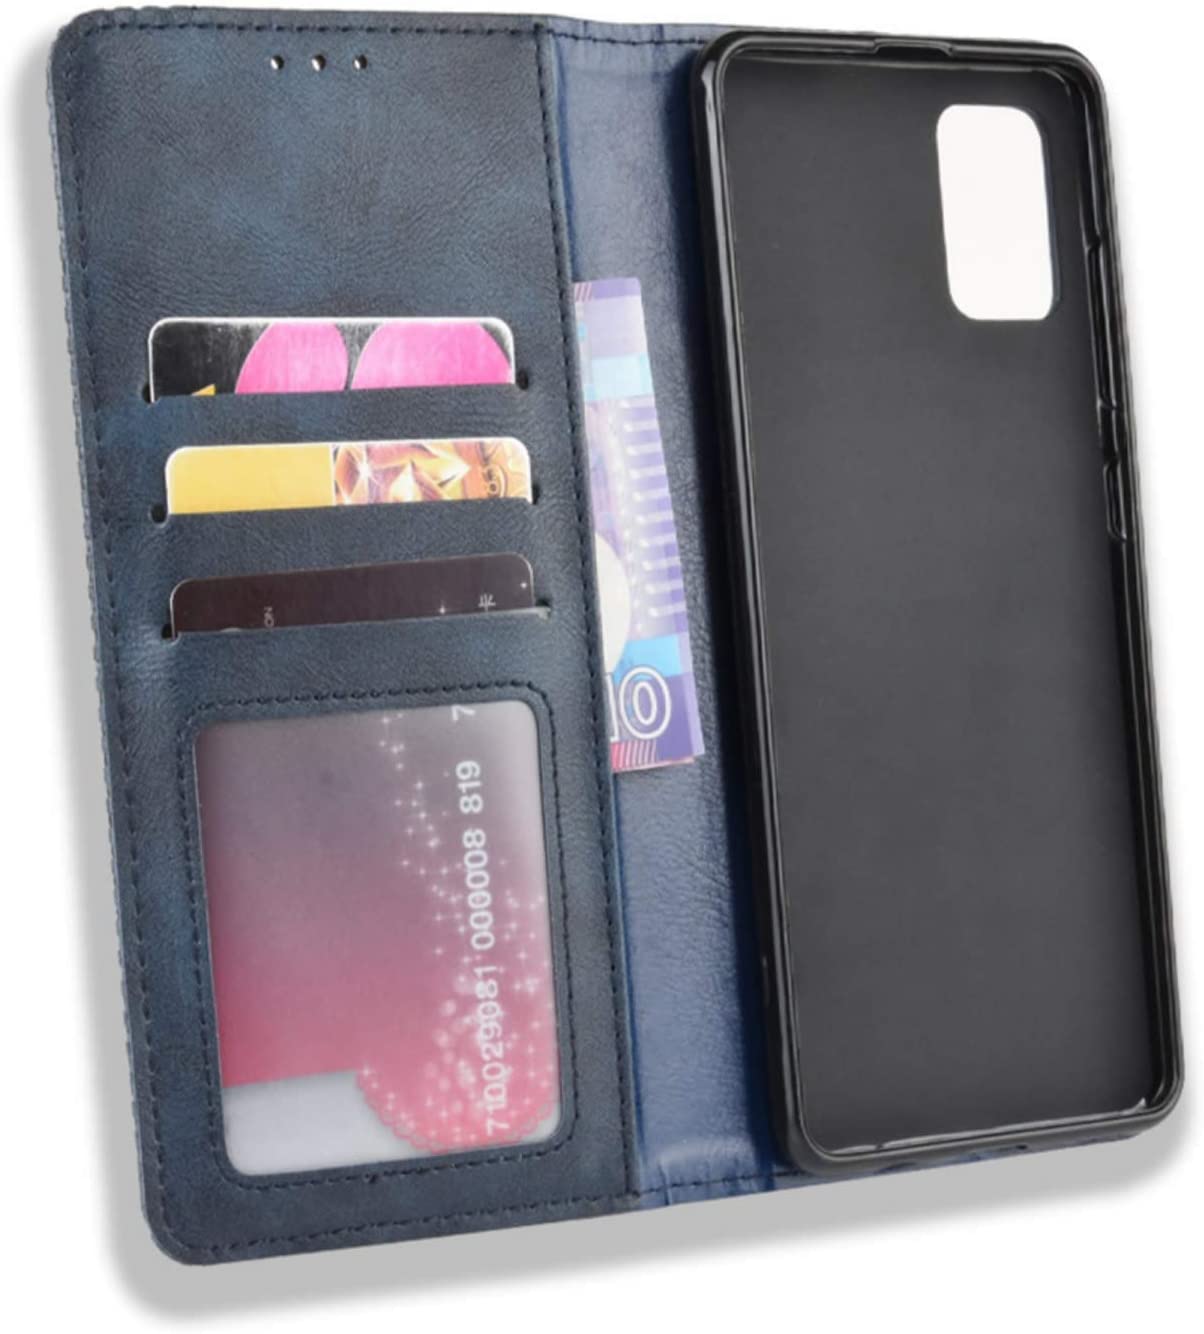 Samsung Galaxy A71 wallet flip cover case with soft tpu inner cover 